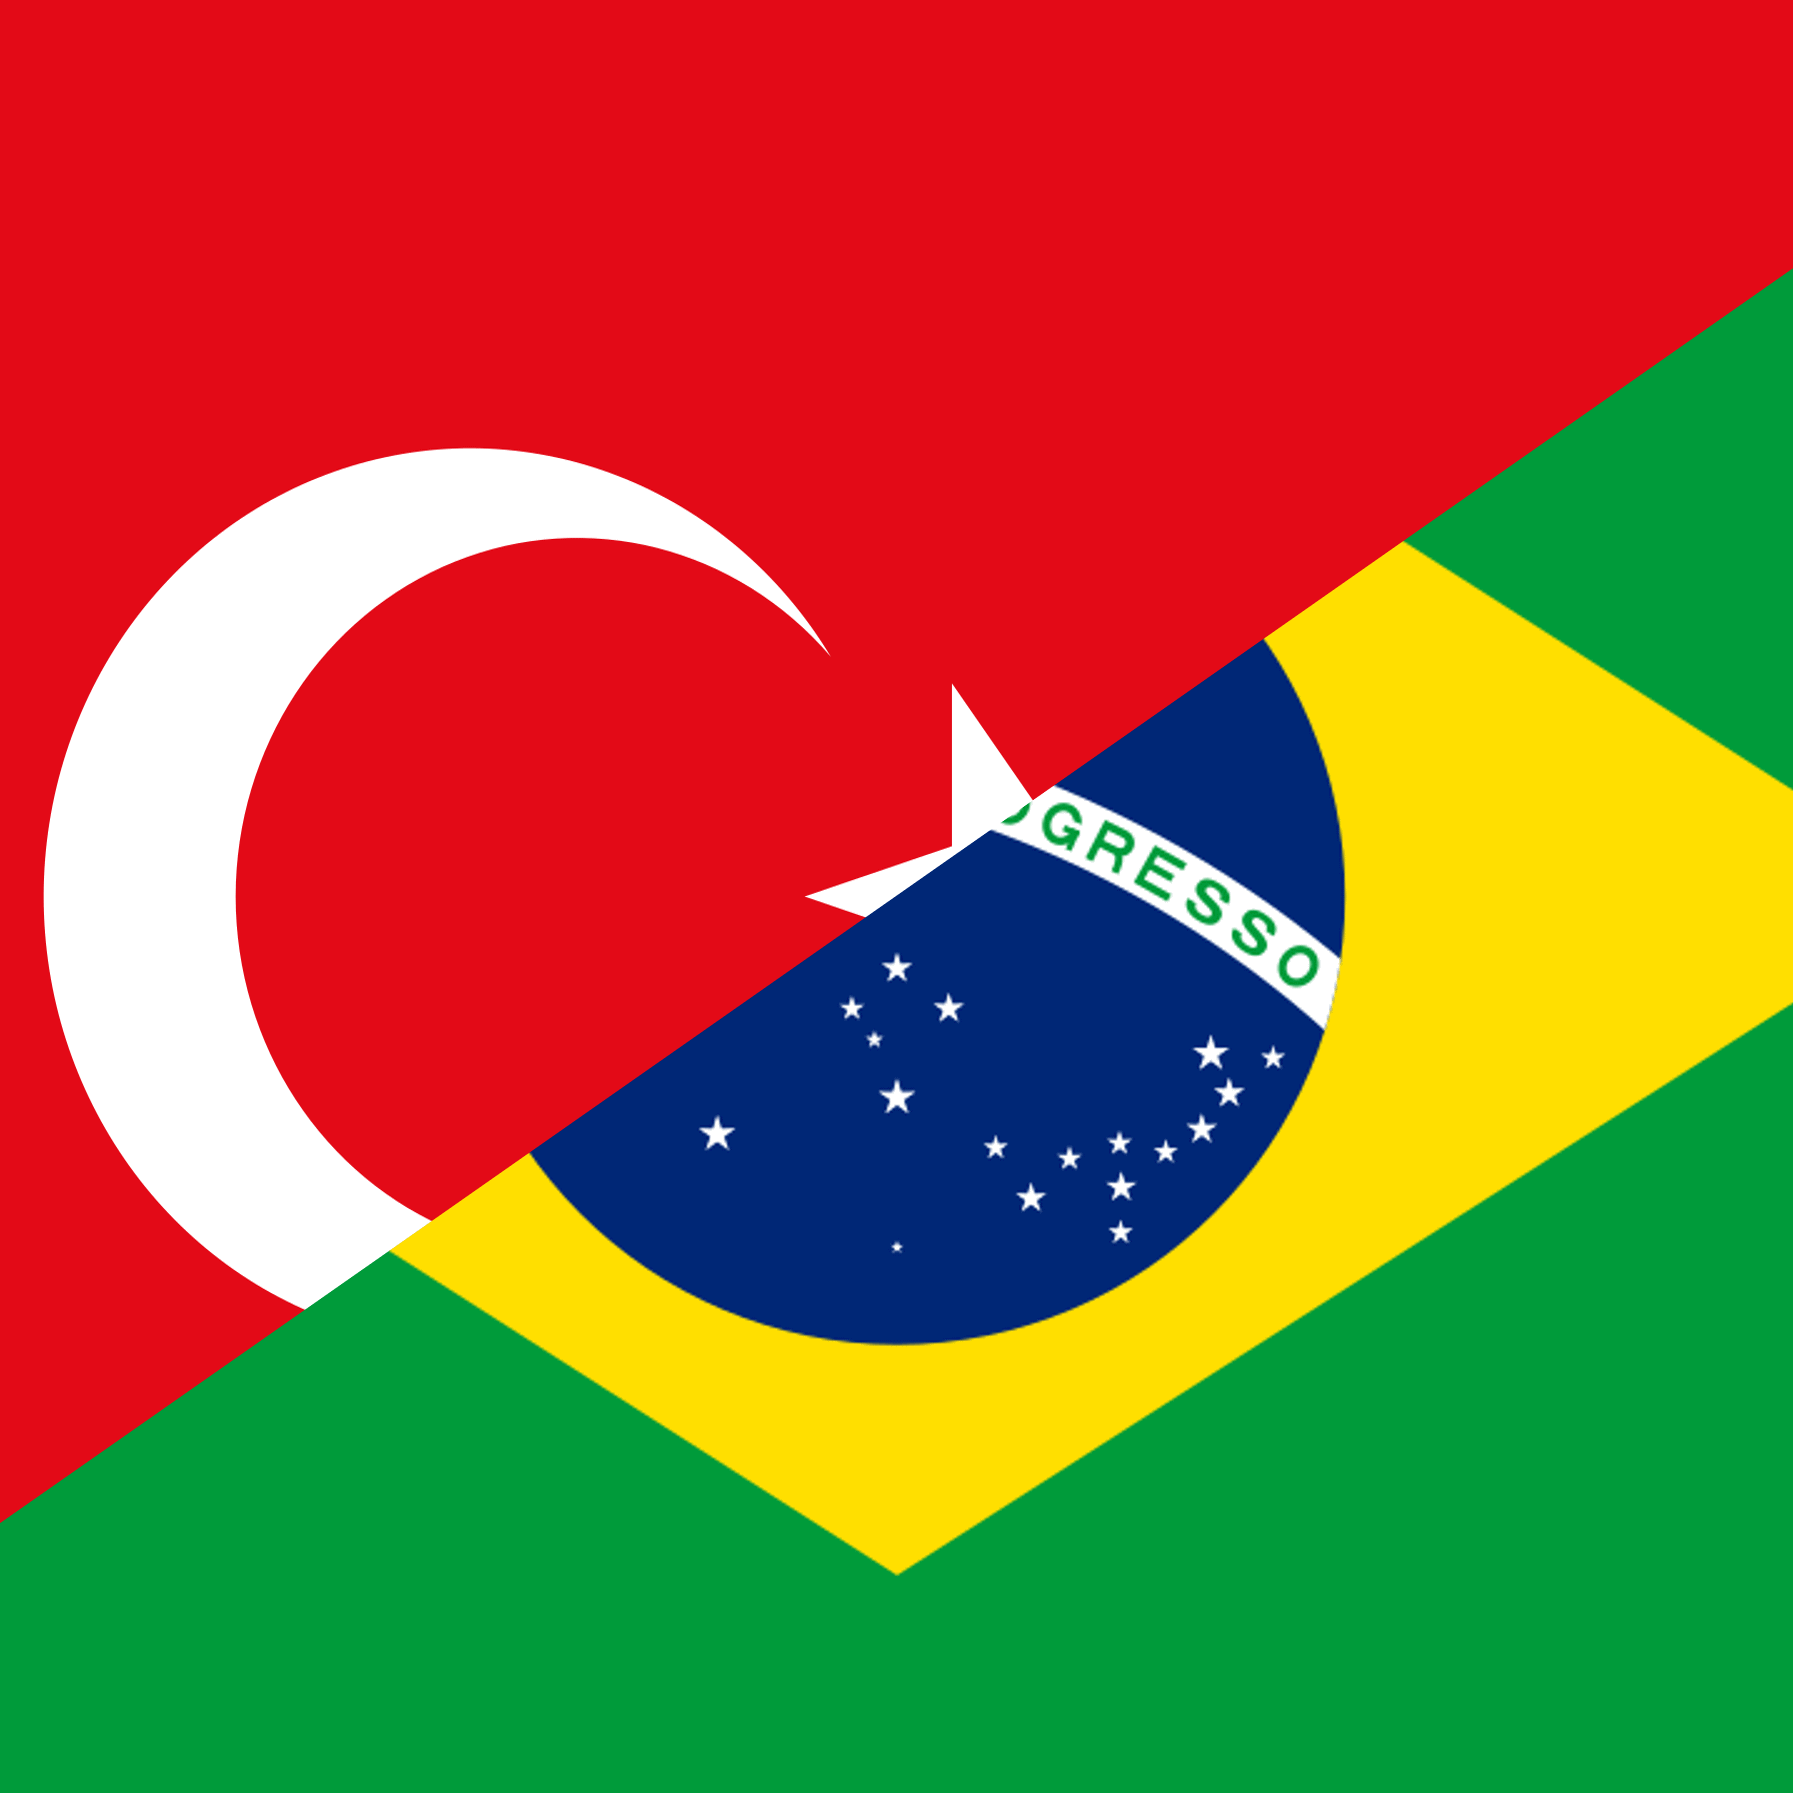 Brazil and Turkey streaming servers added image